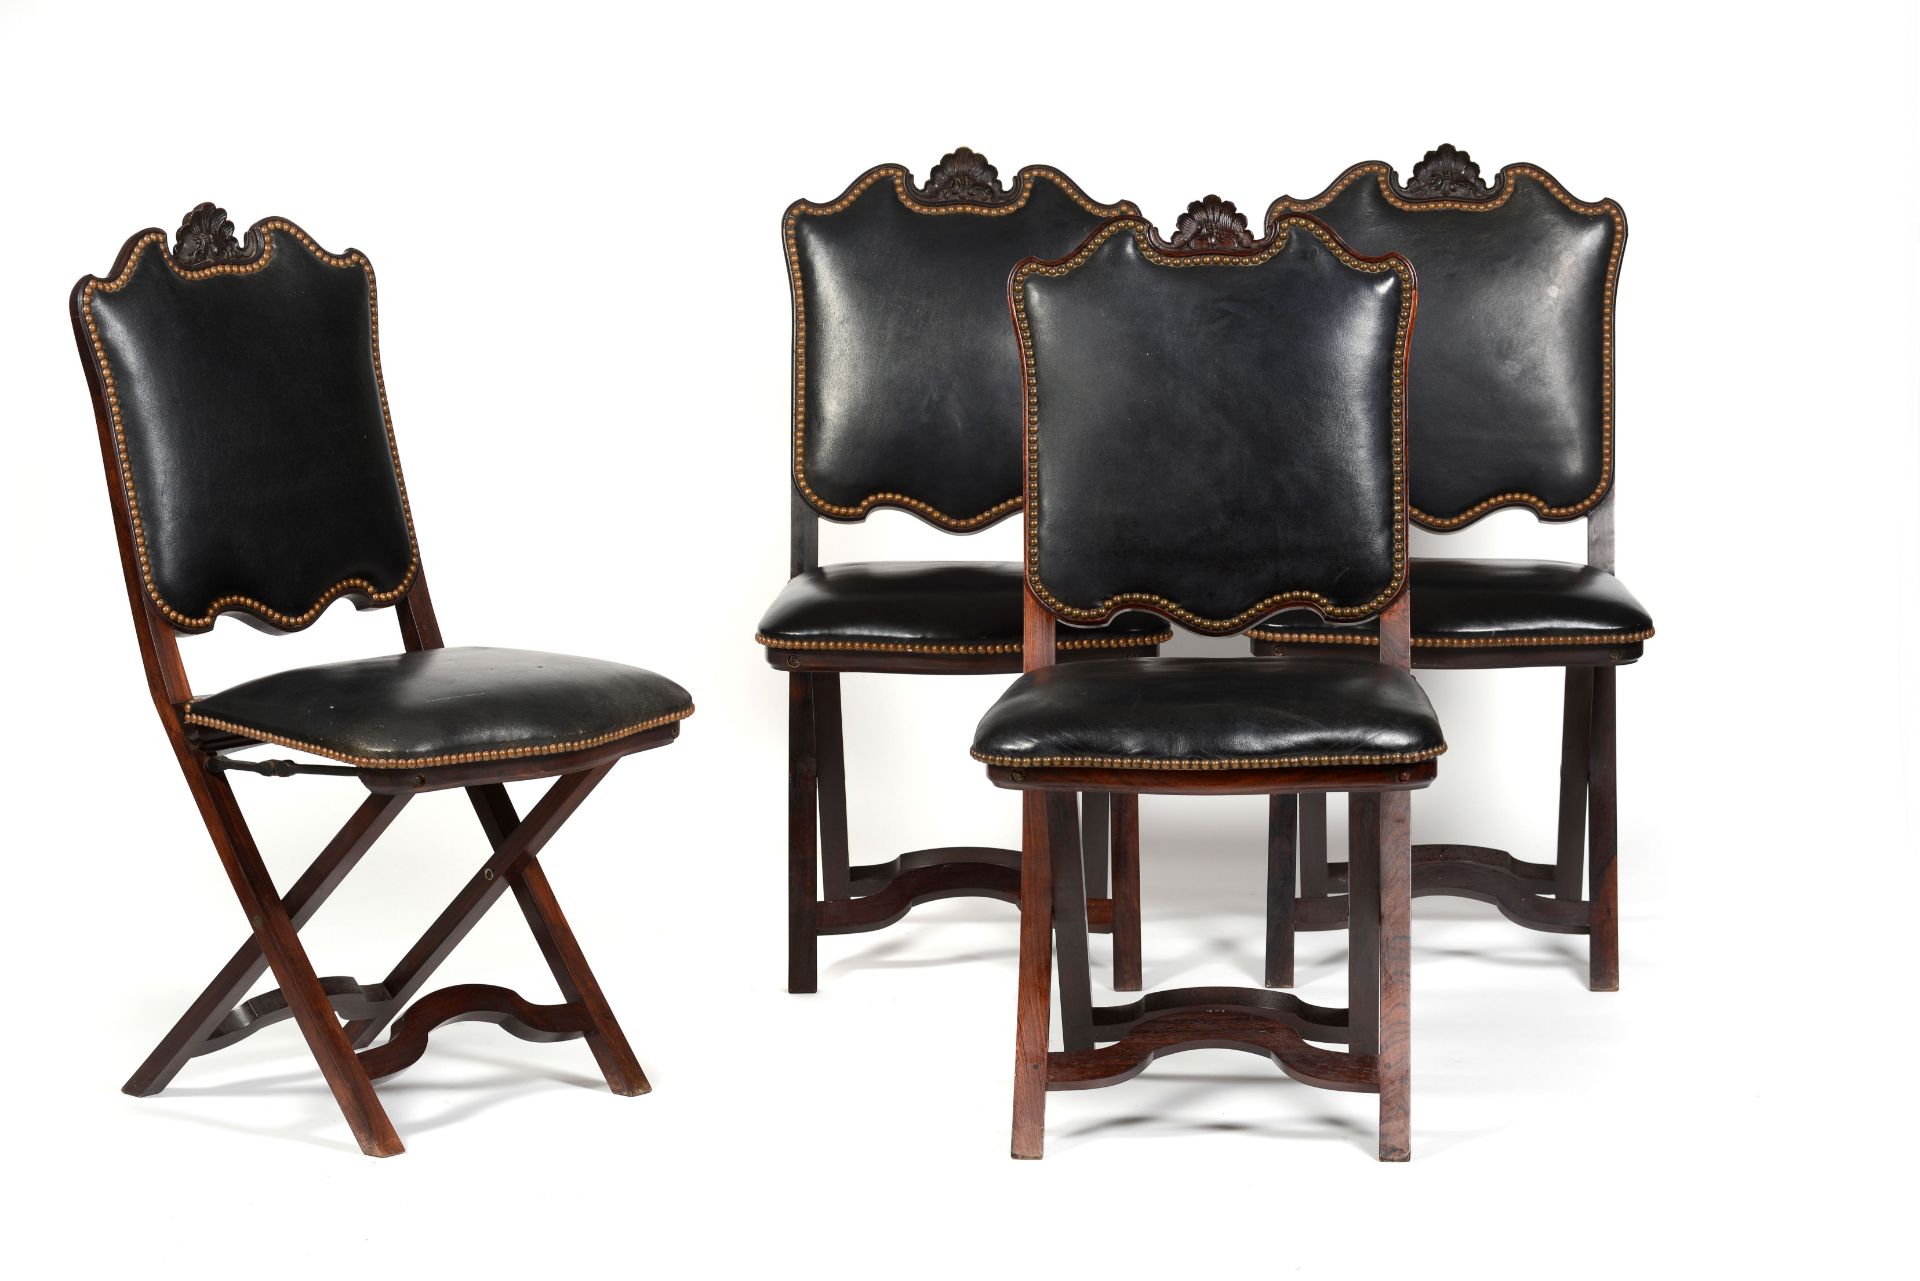 A set of D.João V/D.José style articulated chairs